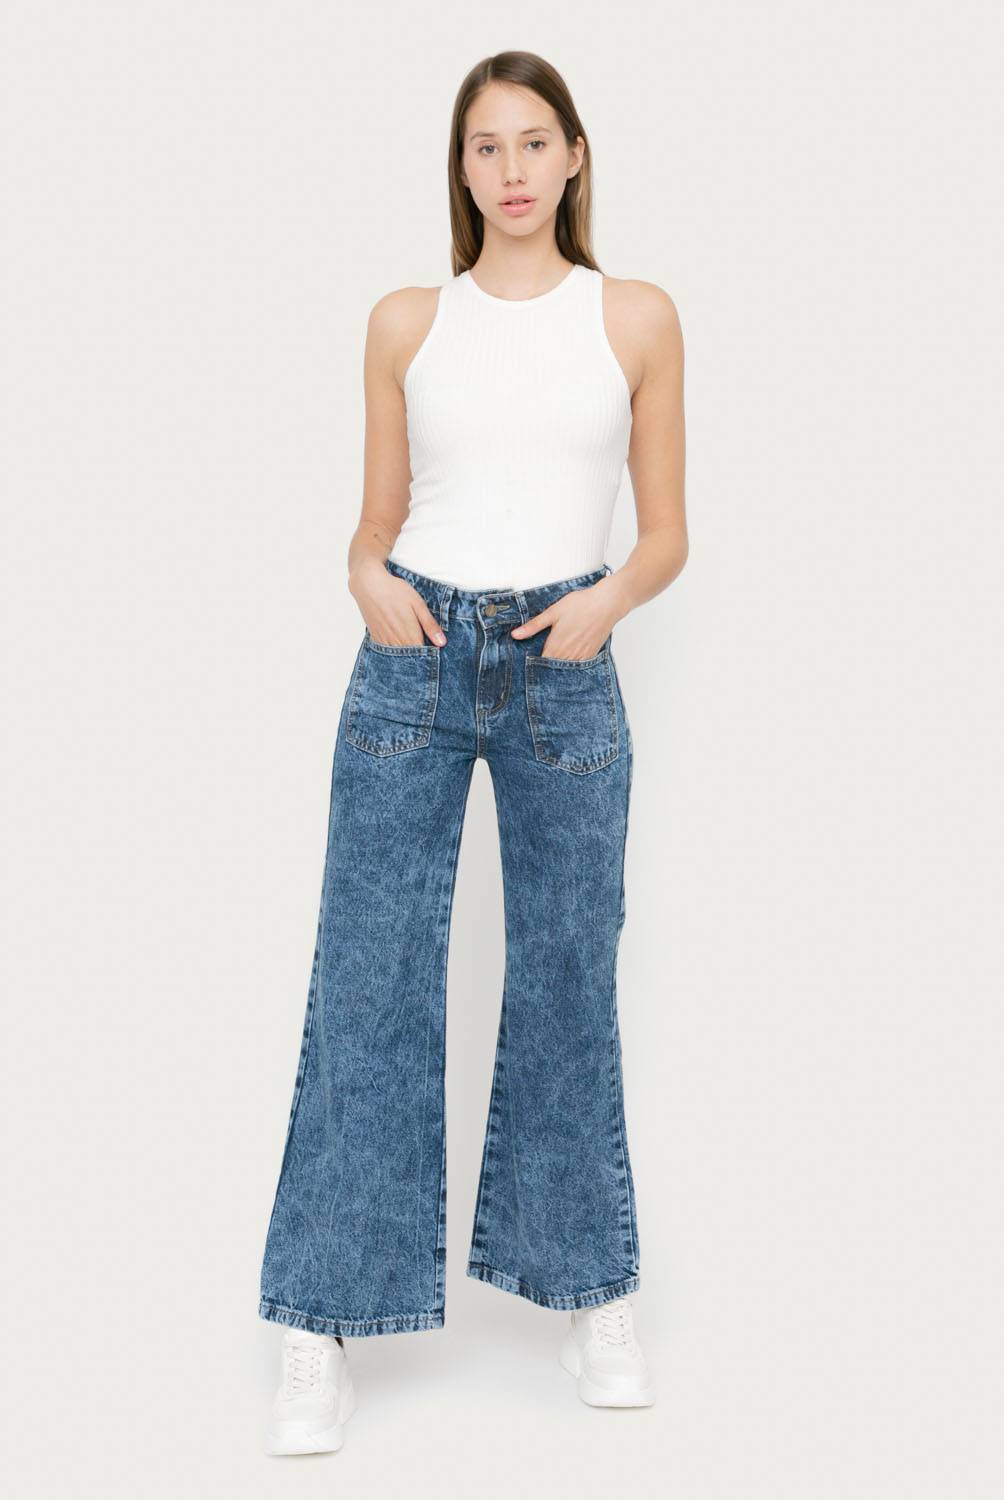 RUPHA - Rupha Jeans Wide Leg Mujer